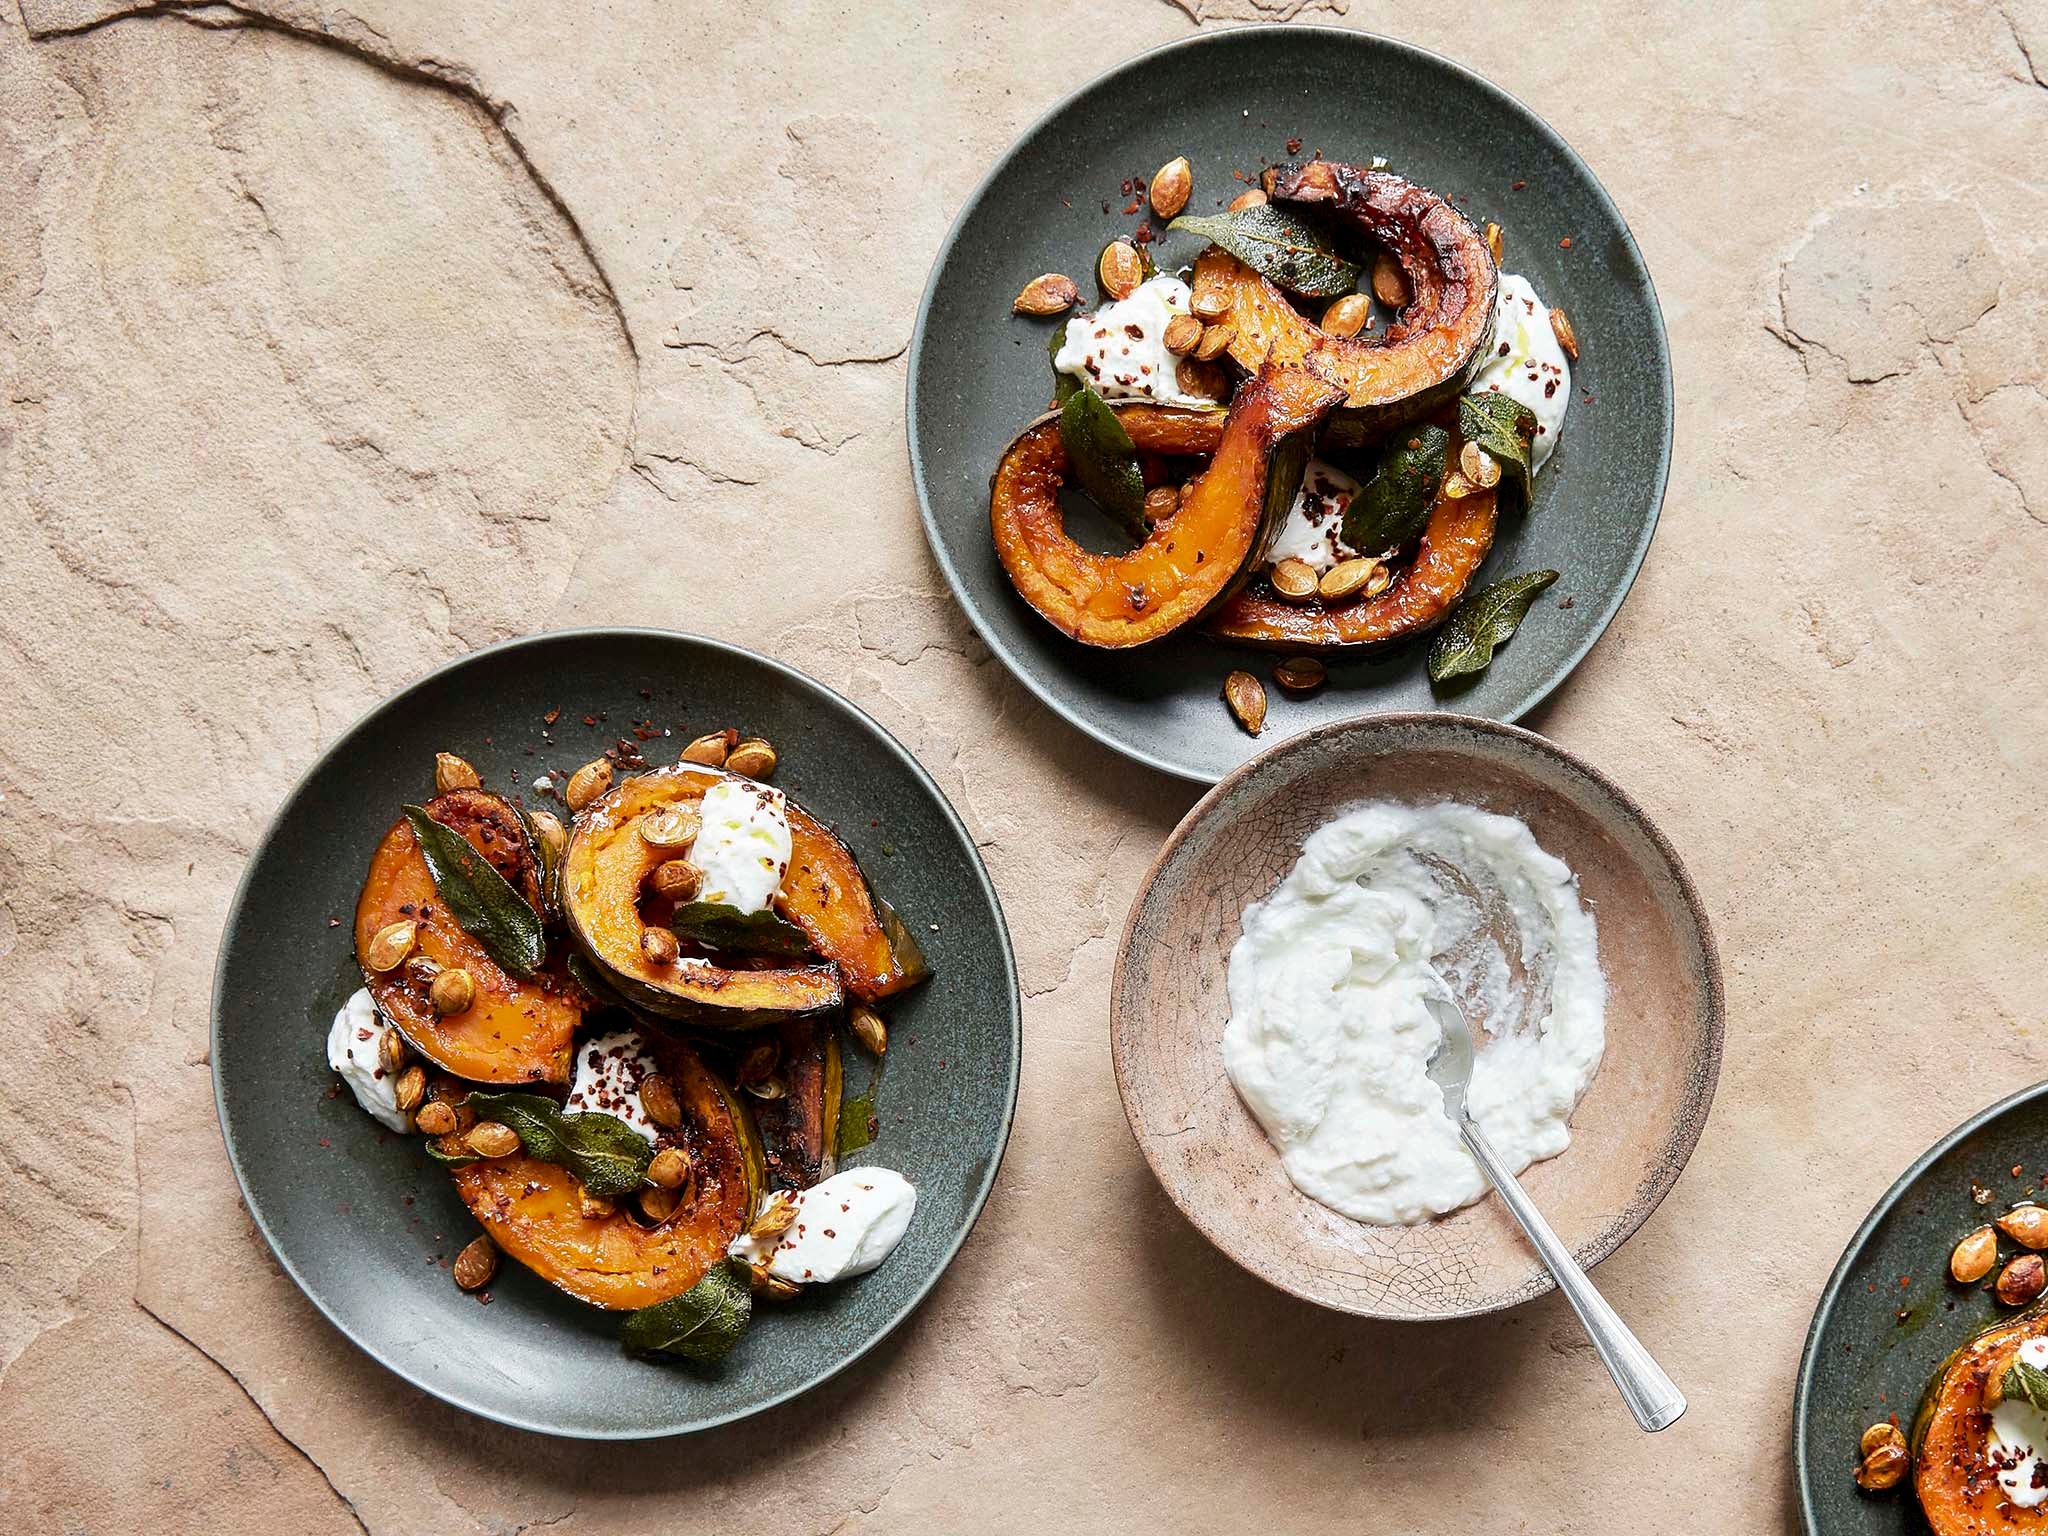 Sweet, buttery pumpkin flesh with roasted sage and a slick of salty curd